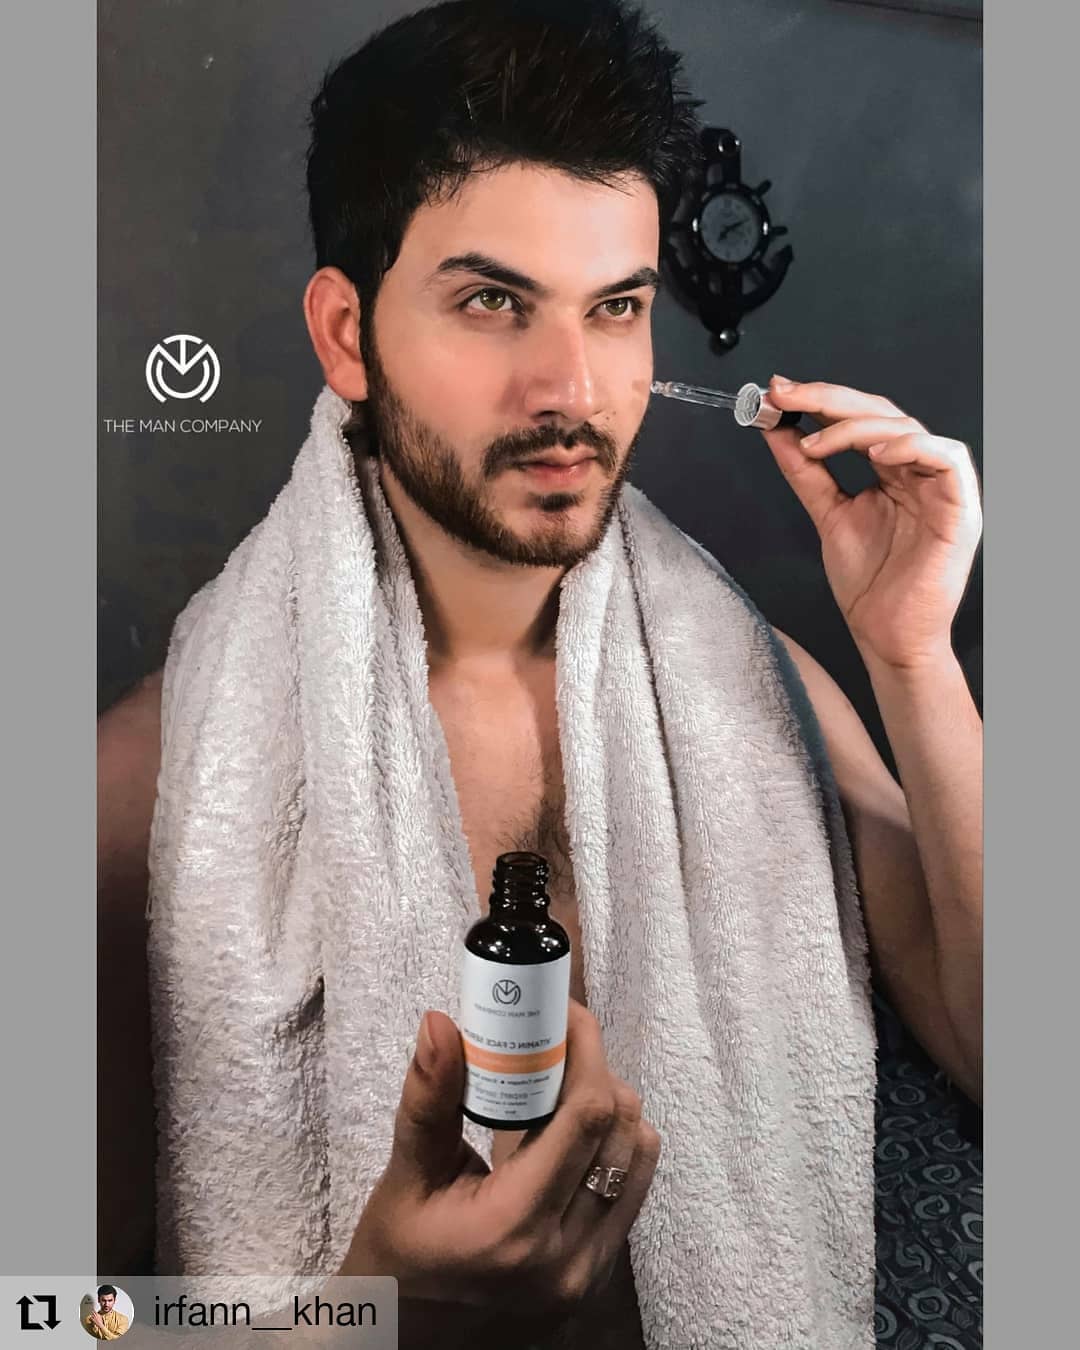 The Man Company - #Repost @irfann__khan
. 
. 
. 
. 
. 
The Man company brings you a  pollution sheet mask DIY Face care kit + Vitamin C face serum + Anti pollution sheet mask trio for your Skin. This...